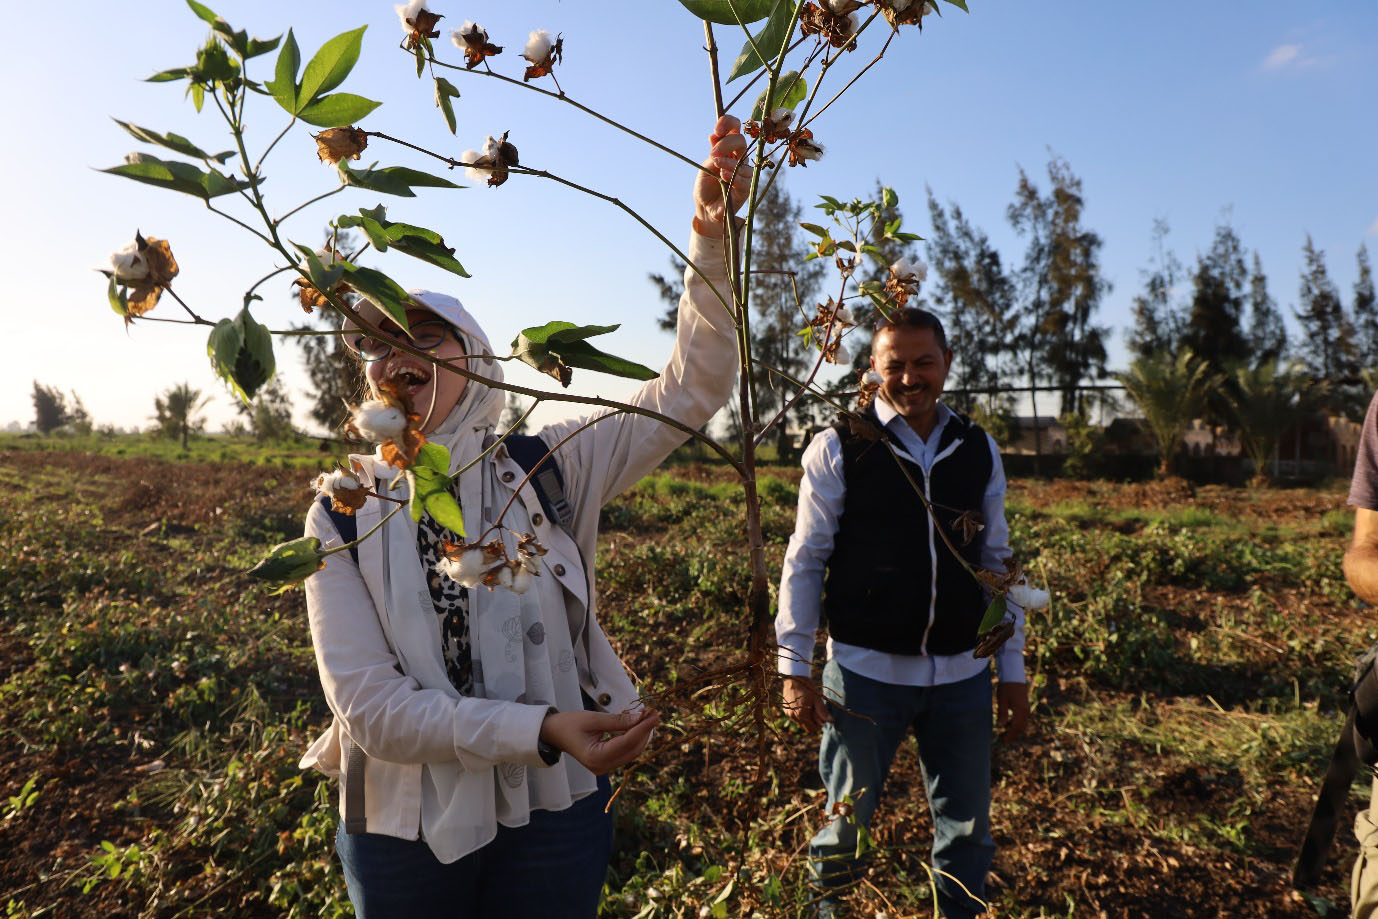 In Egypt, Ventile is supporting the production of cotton cultivated at self-sustaining farms using biodynamic principles. © Ventile